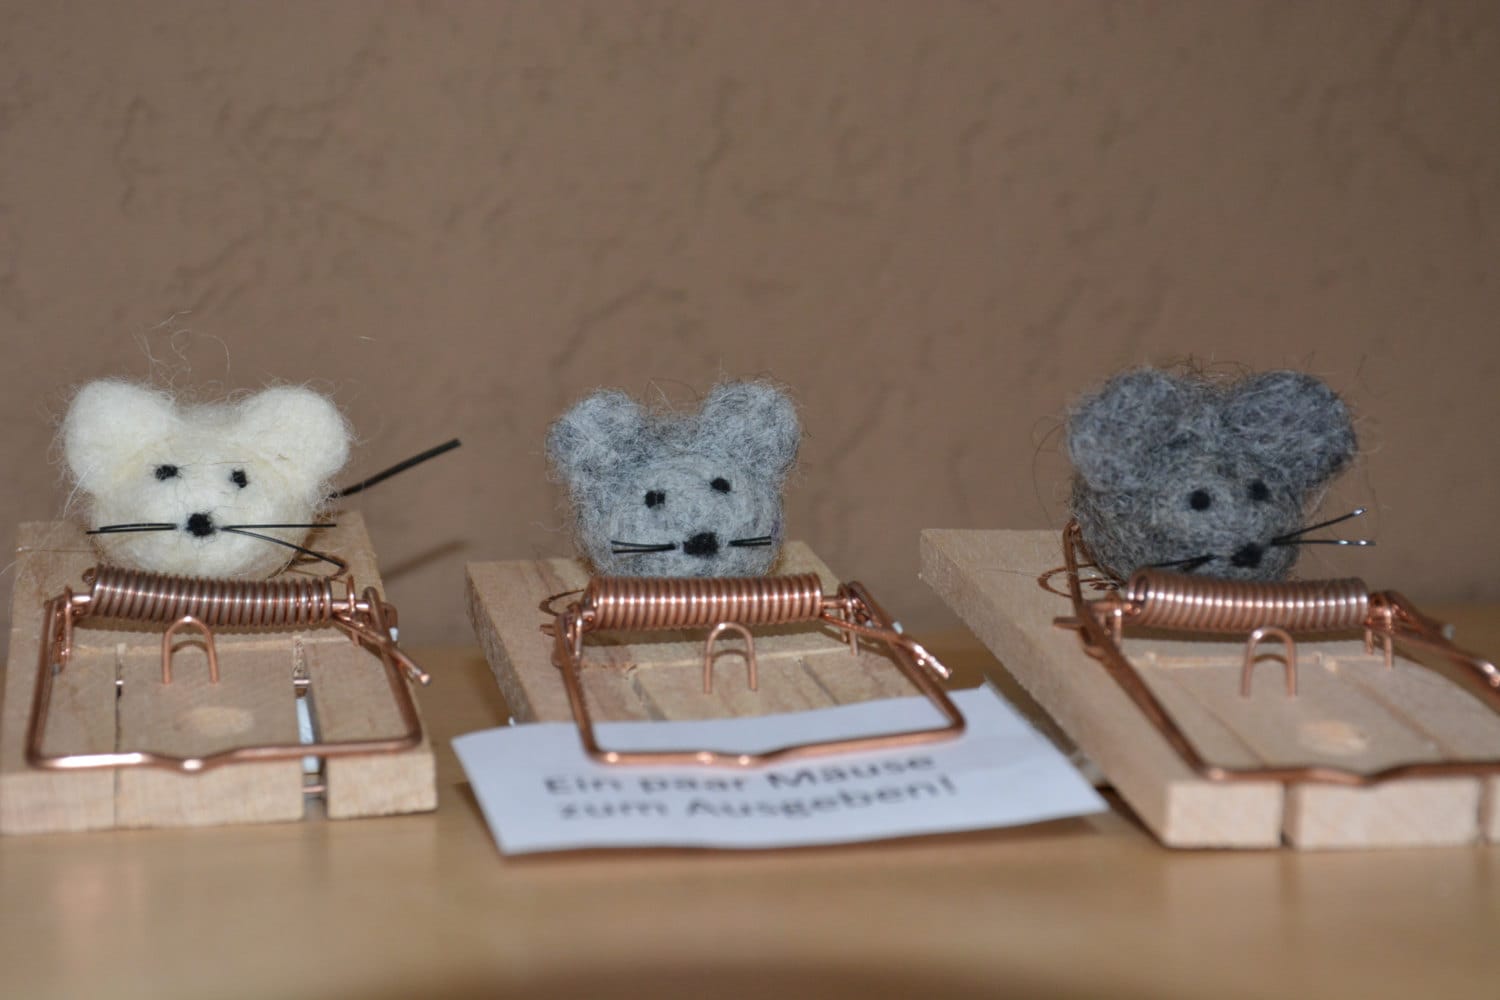 Rodent trap - . Gift Ideas